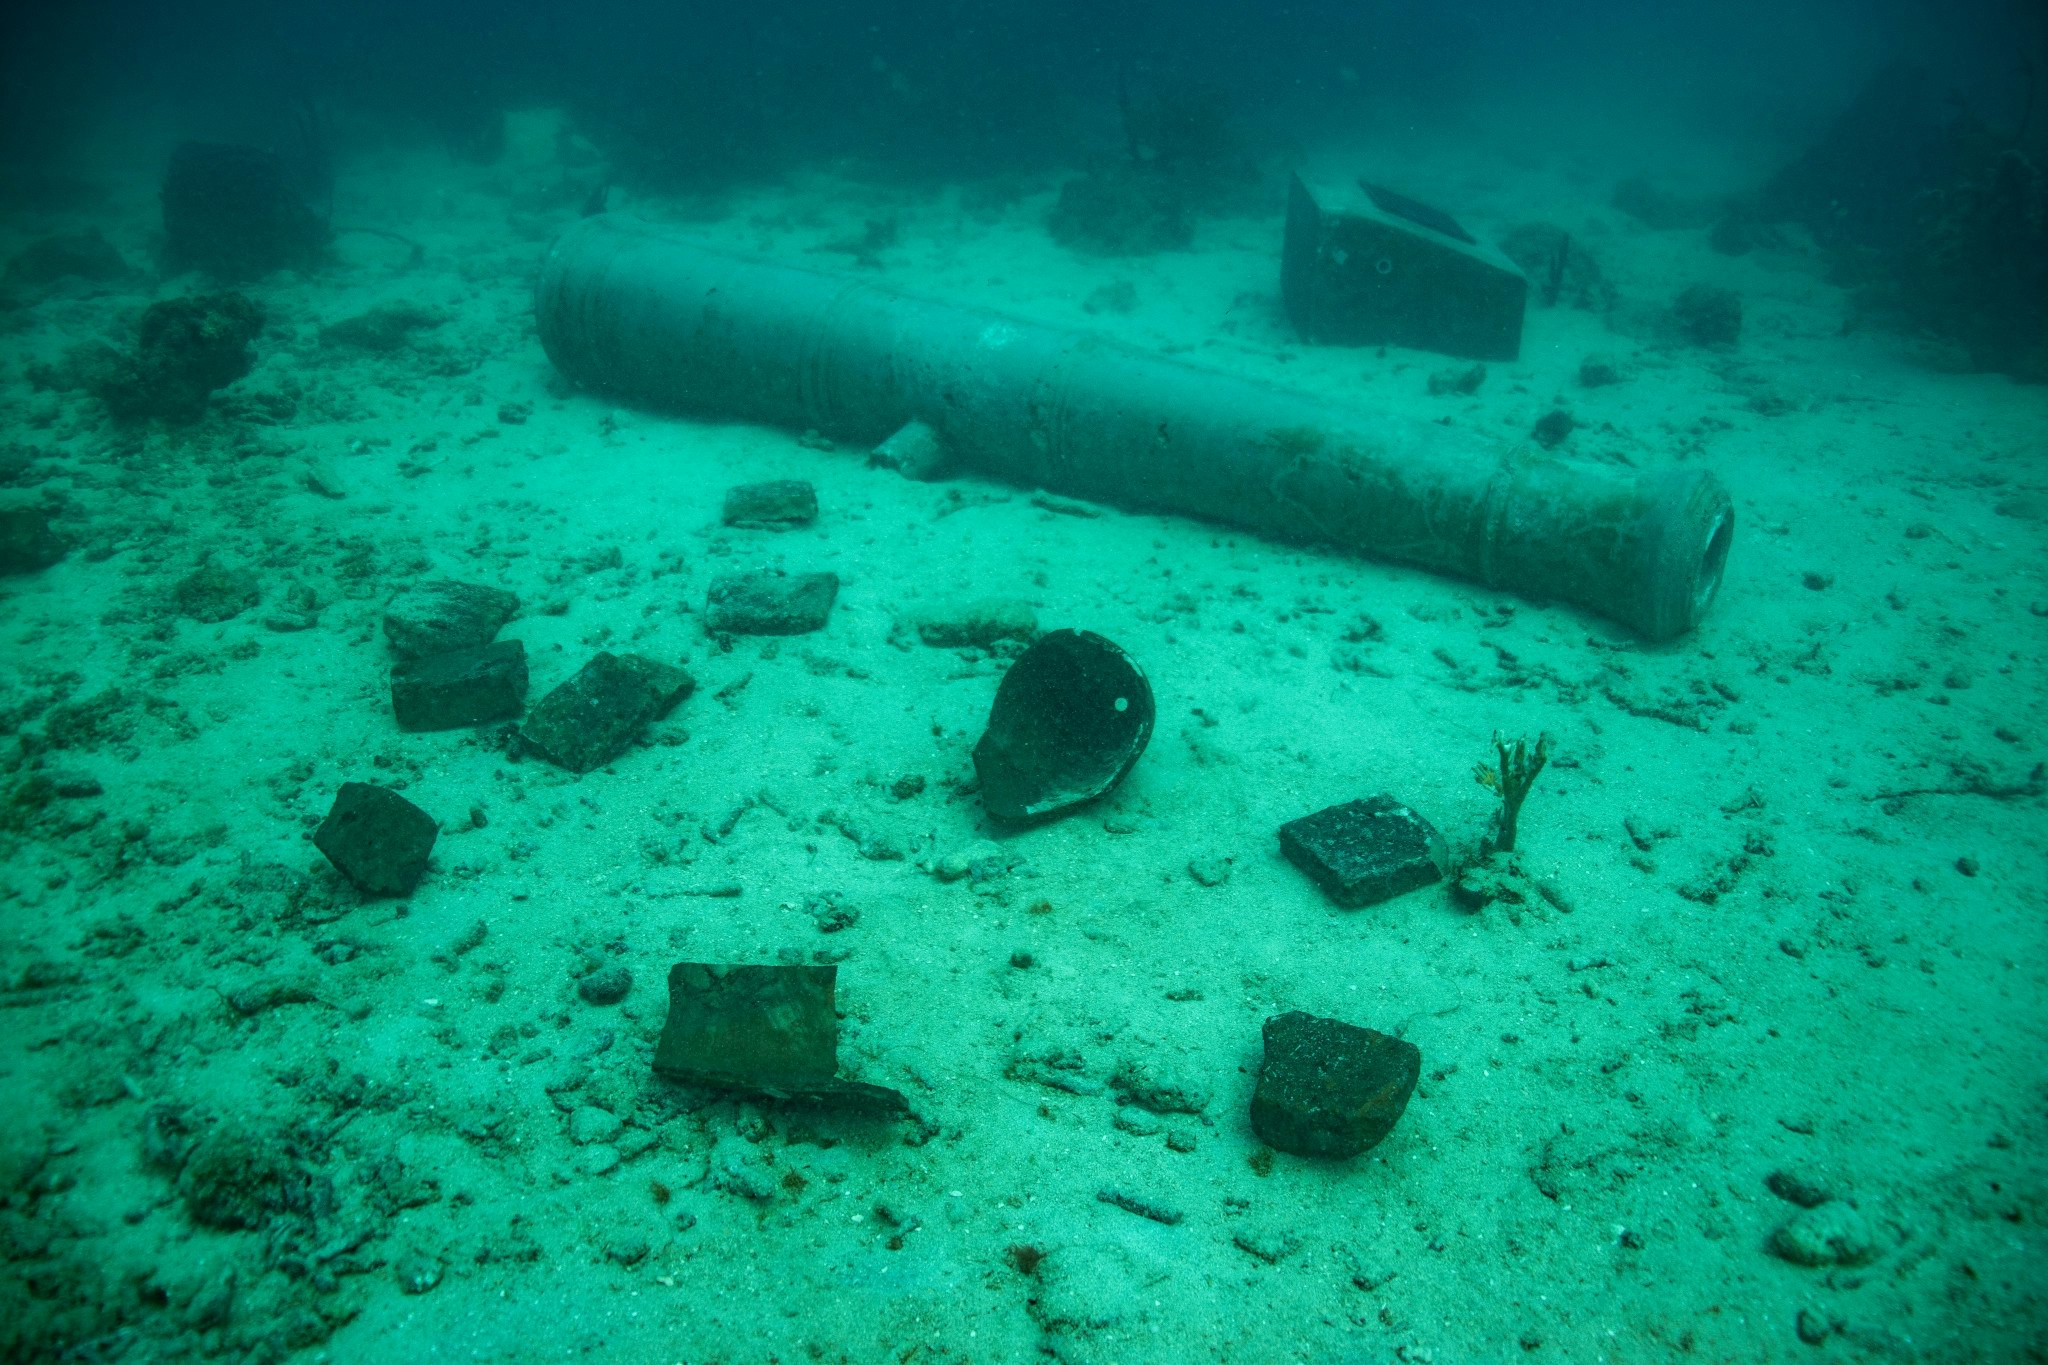 Shipwreck artefacts at the Underwater Museum in the Domican Republic